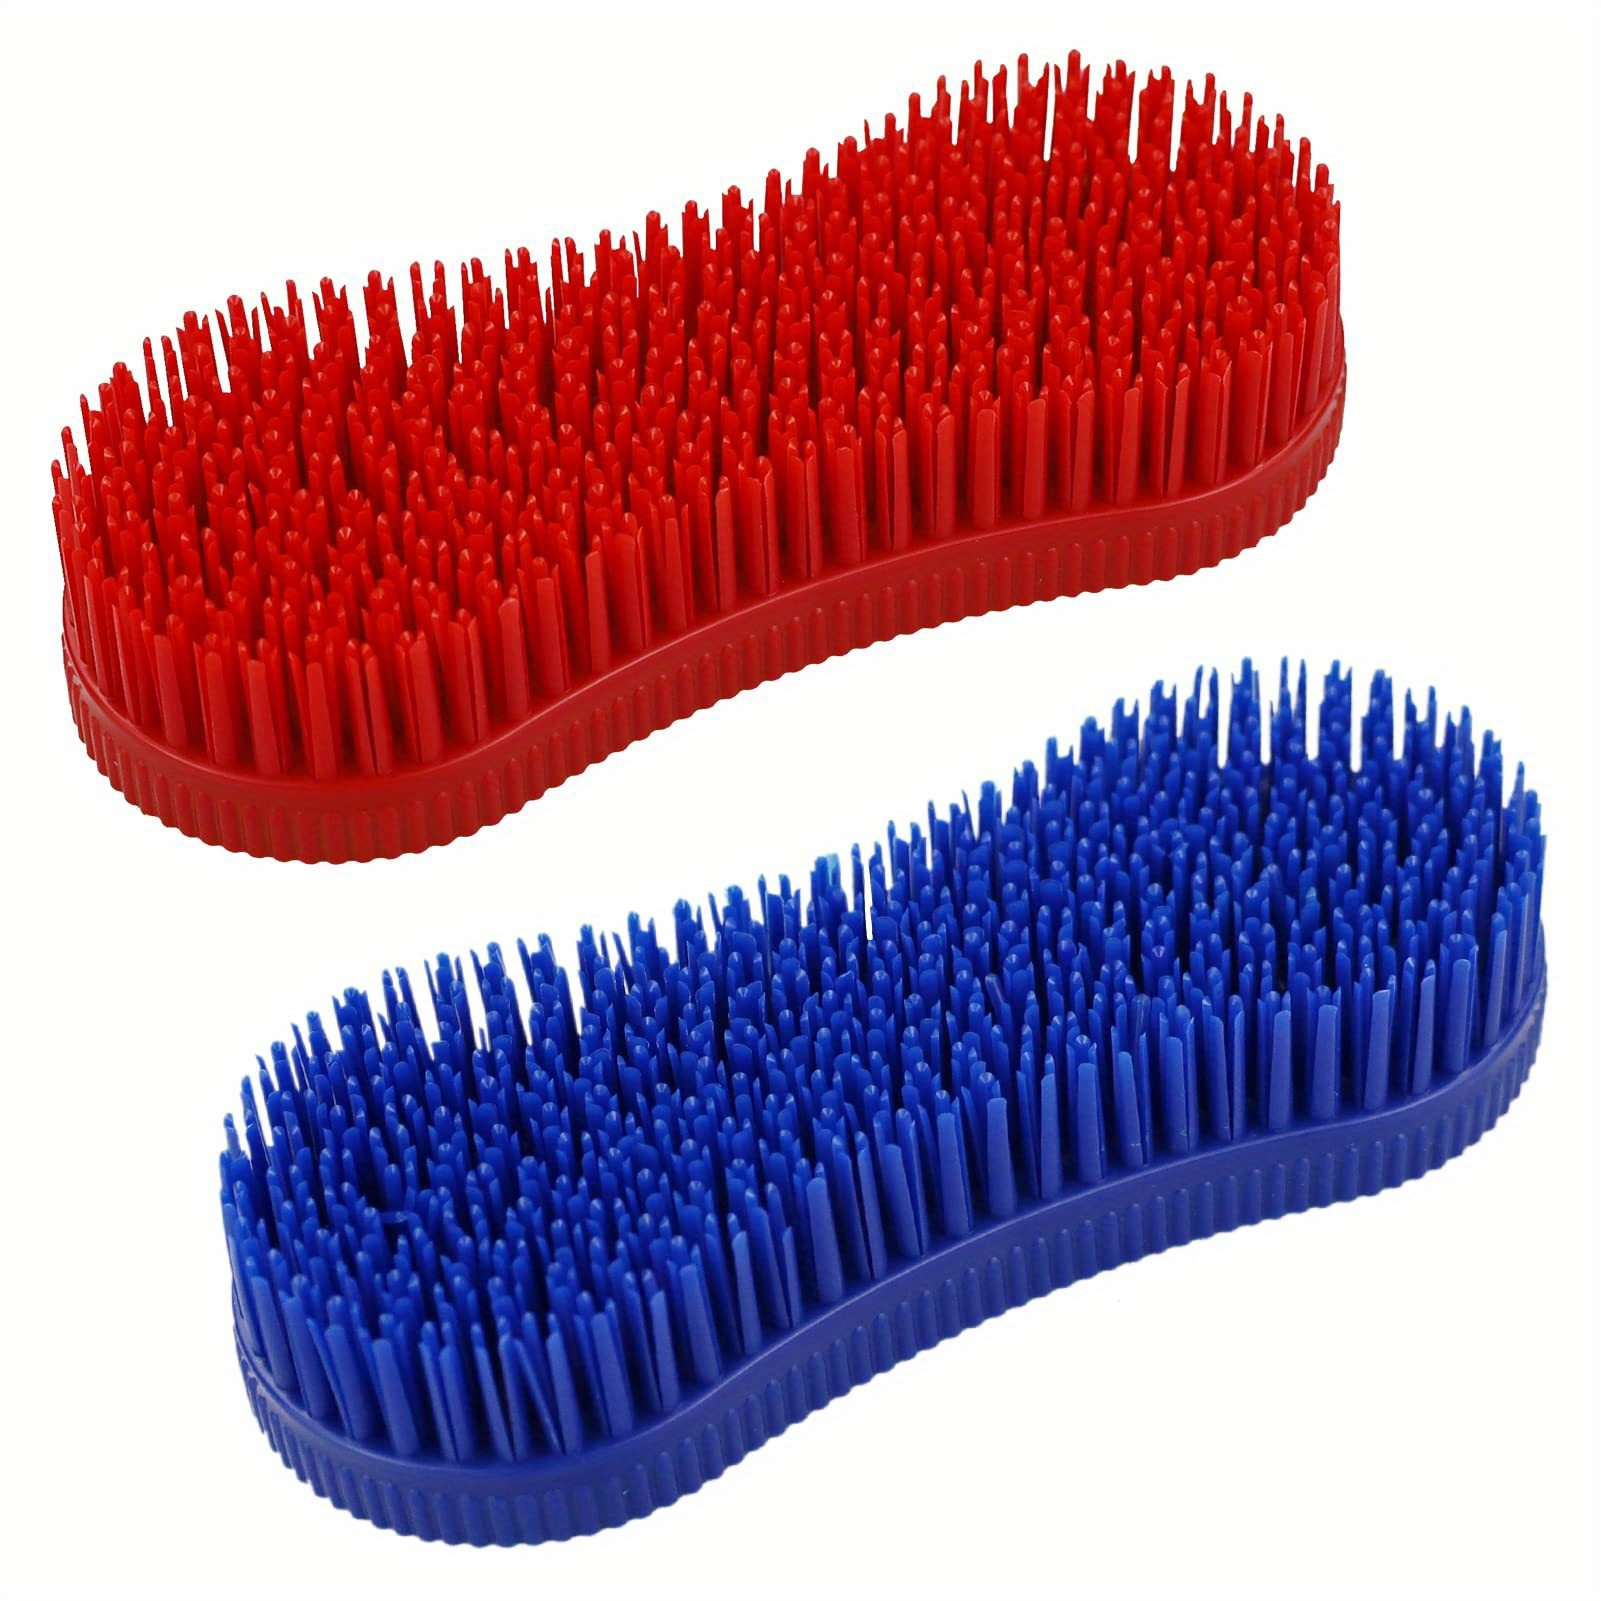 

1pc Horse Grooming Brush, Durable Plastic With Soft Rubber Bristles, Gentle Care, Effective Cleaning & Massage Tool For Horses, Multi-functional Equestrian Supplies